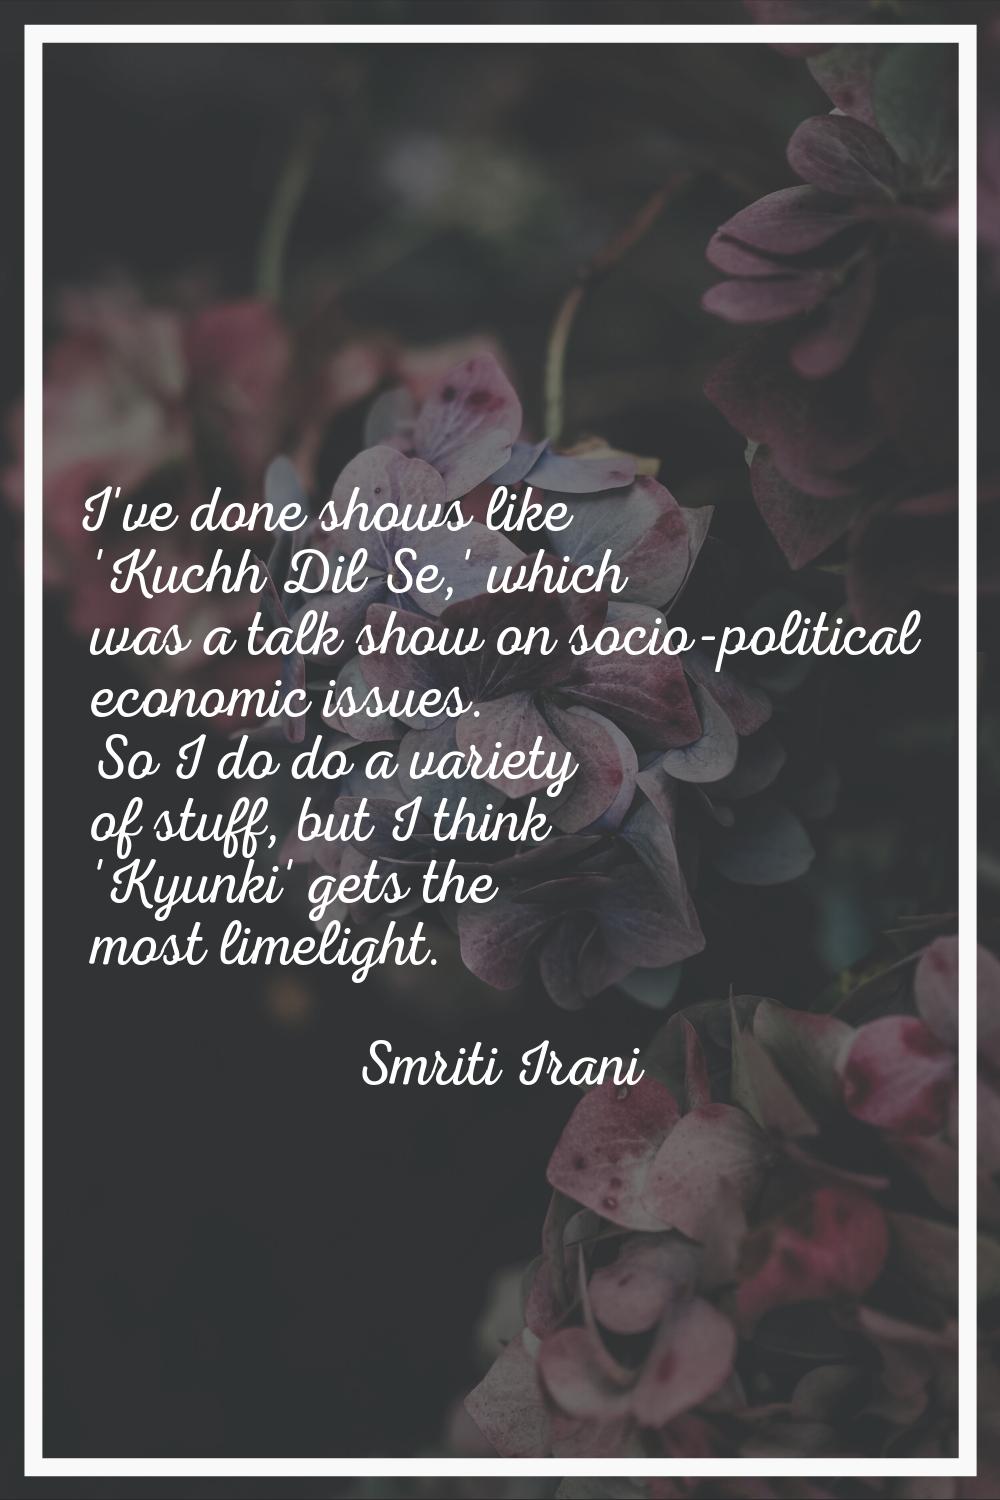 I've done shows like 'Kuchh Dil Se,' which was a talk show on socio-political economic issues. So I